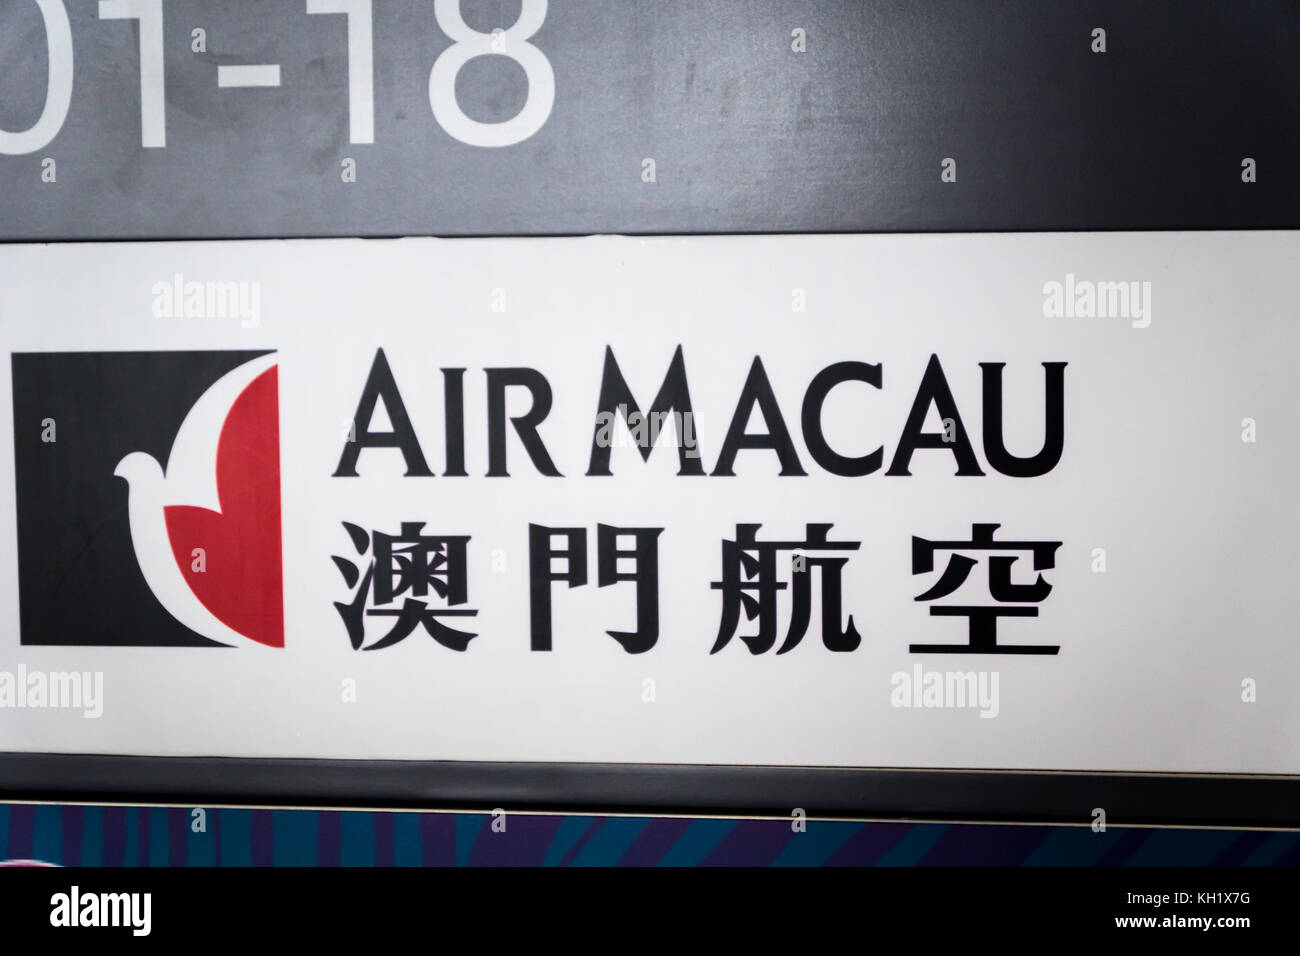 Bejing, China - October 2017: Air Macau company logo at Beijing airport. Air Macau is the flag carrier airline of and headquartered in Macau. Stock Photo